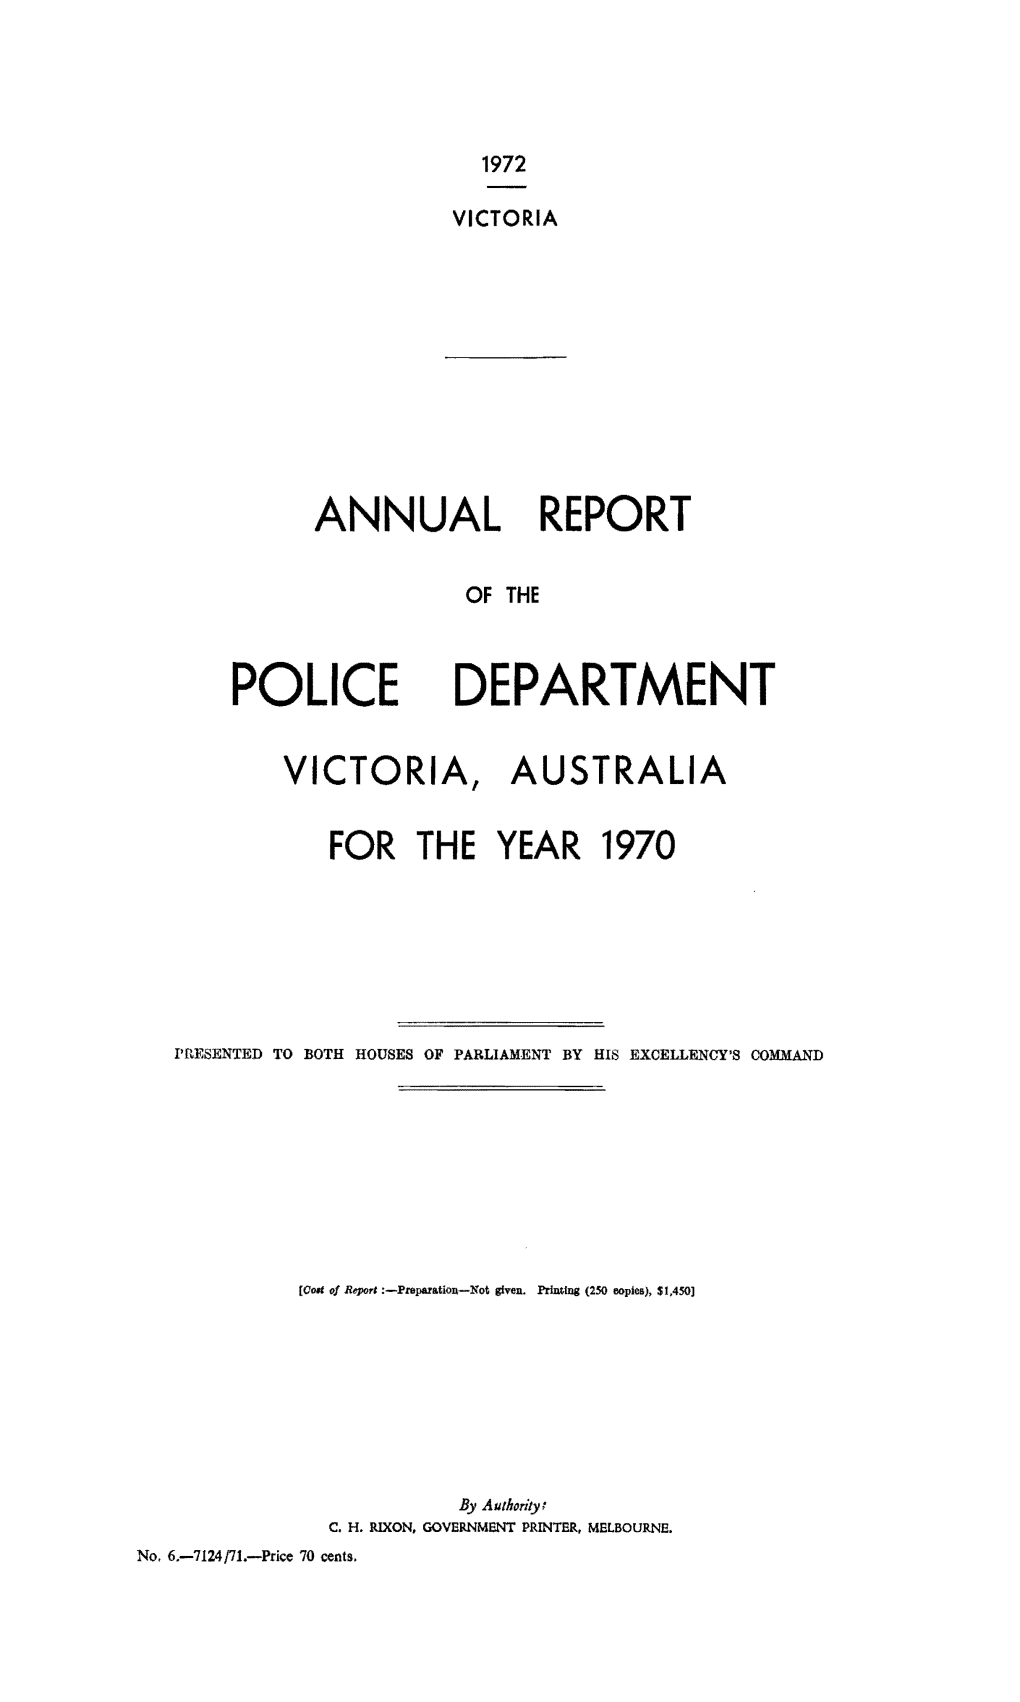 Police Department Victoria, Australia for the Year 1970